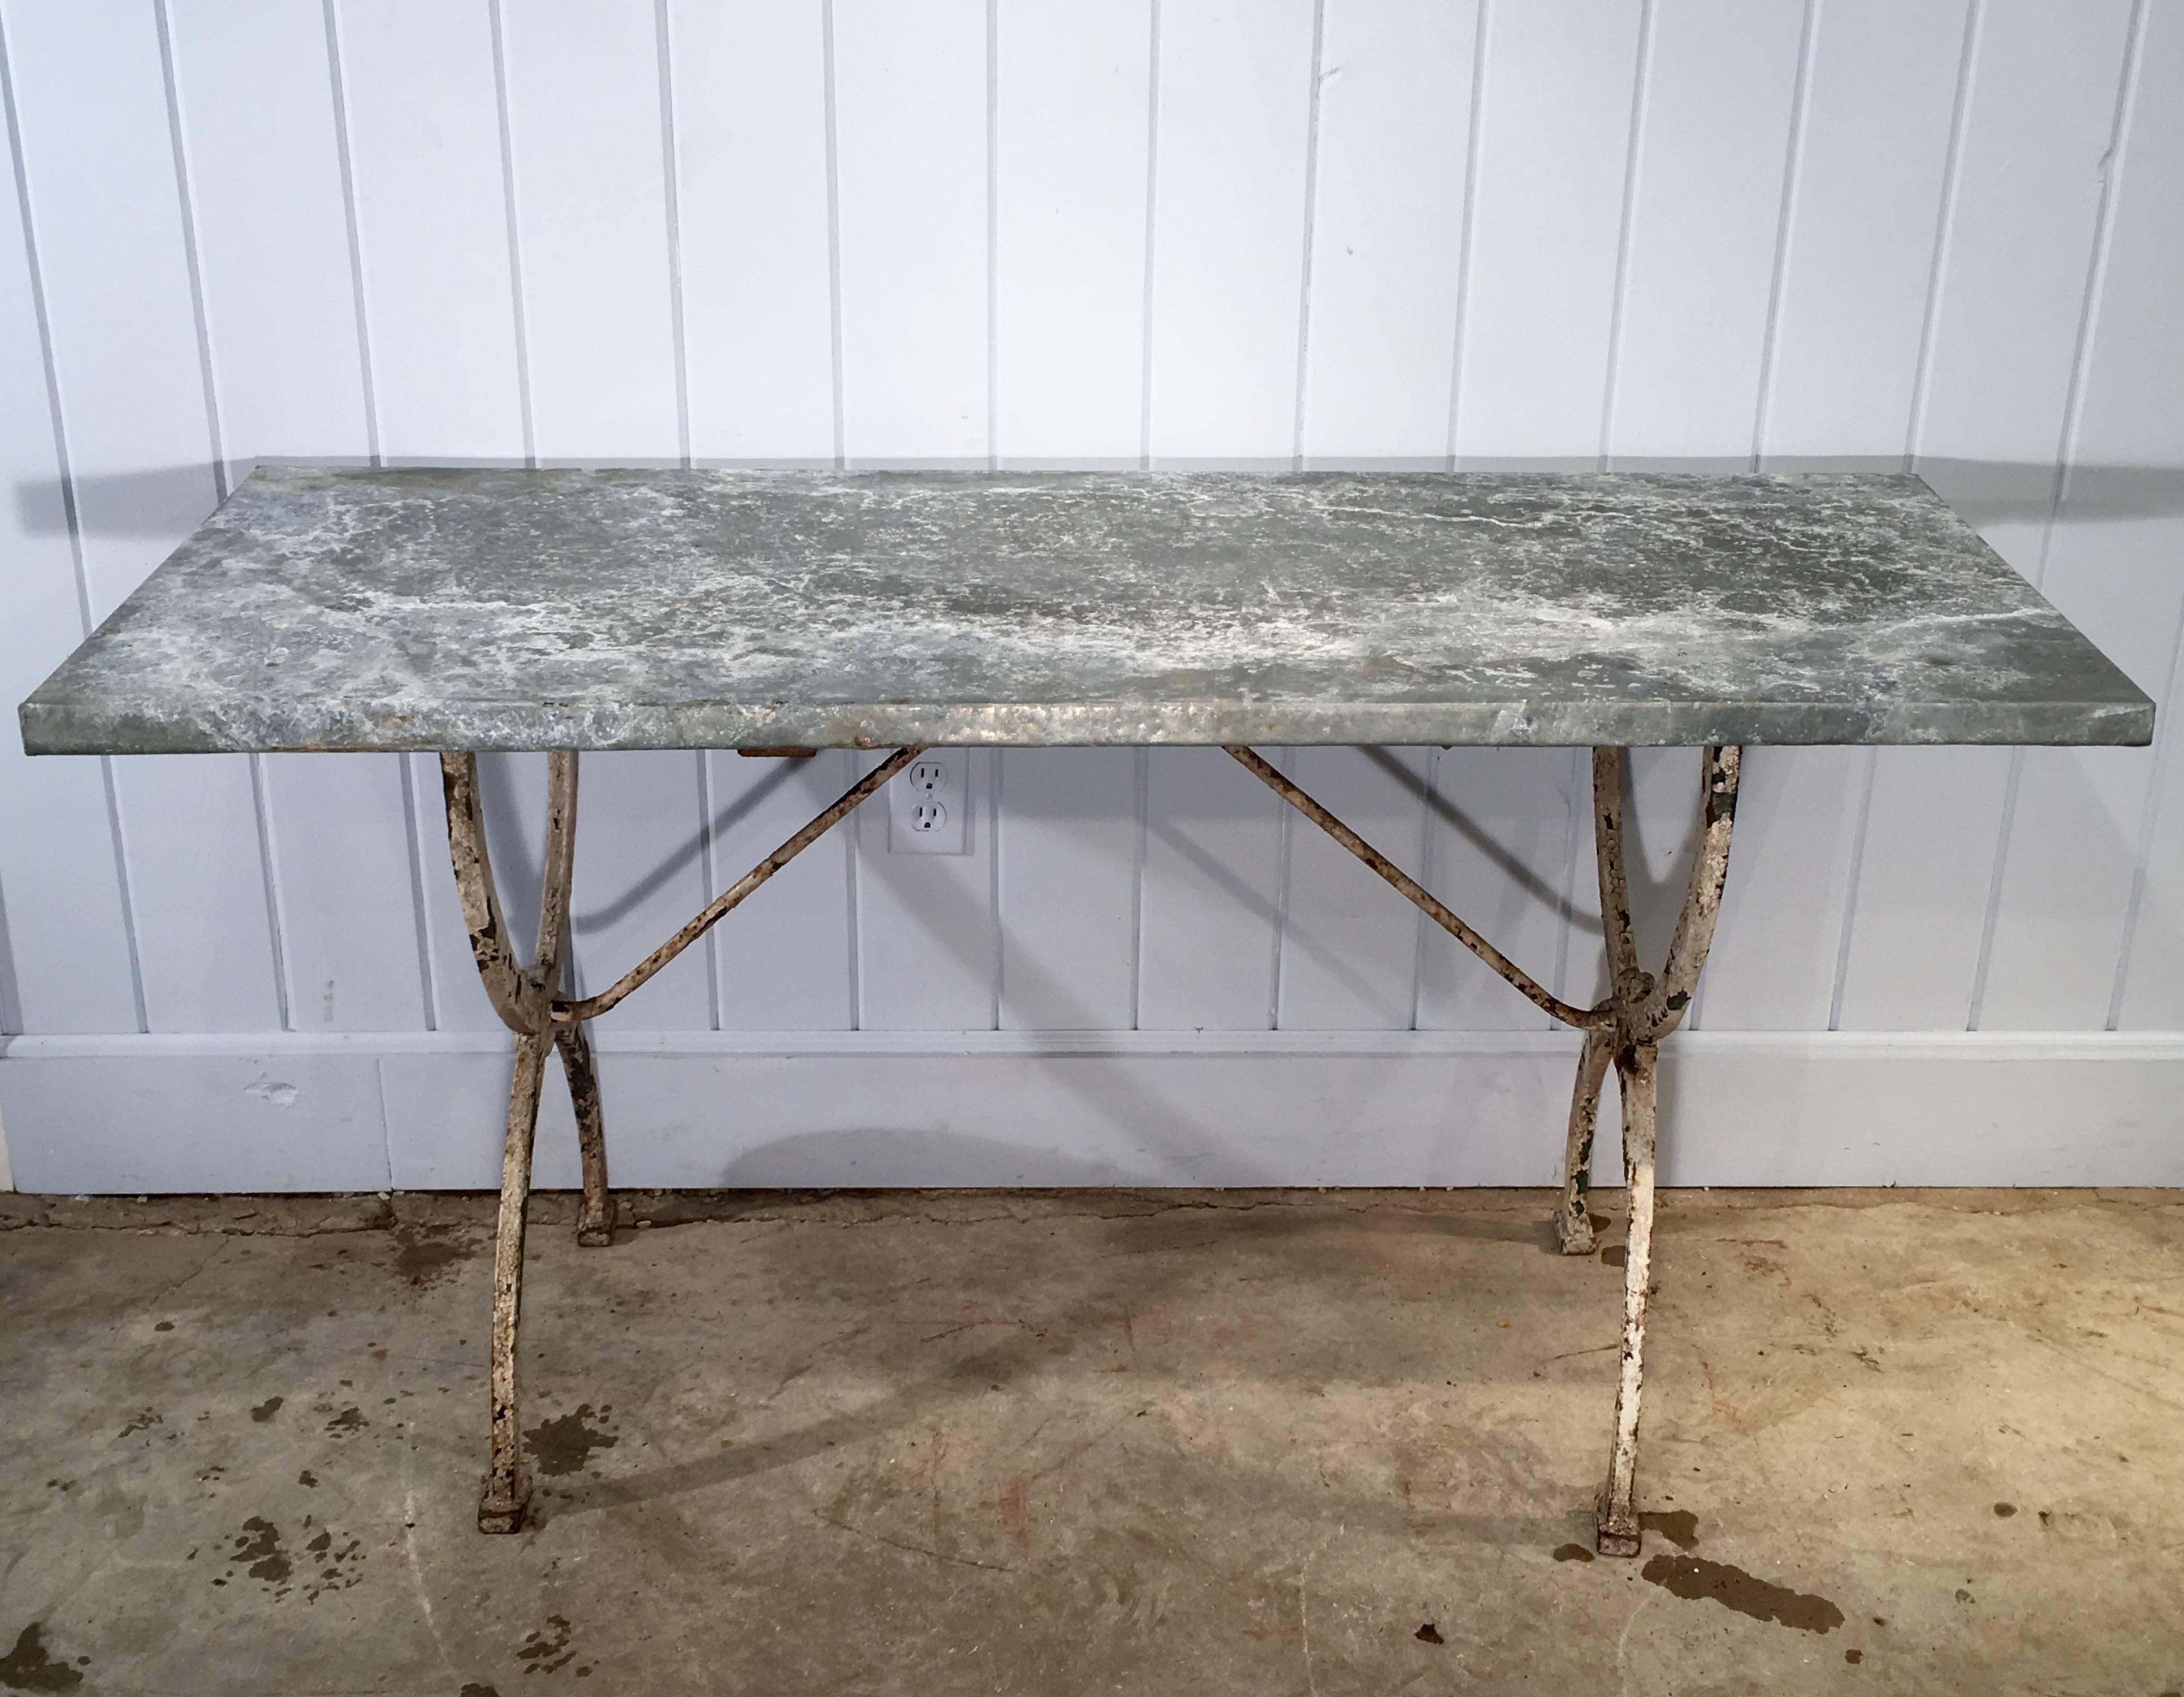 It is difficult to source old and weathered authentic zinc-topped tables, and we found two beauties, very close in size. This is the shorter of the two. Both have identical wrought-iron bases in an old creamy white painted surface with bits of